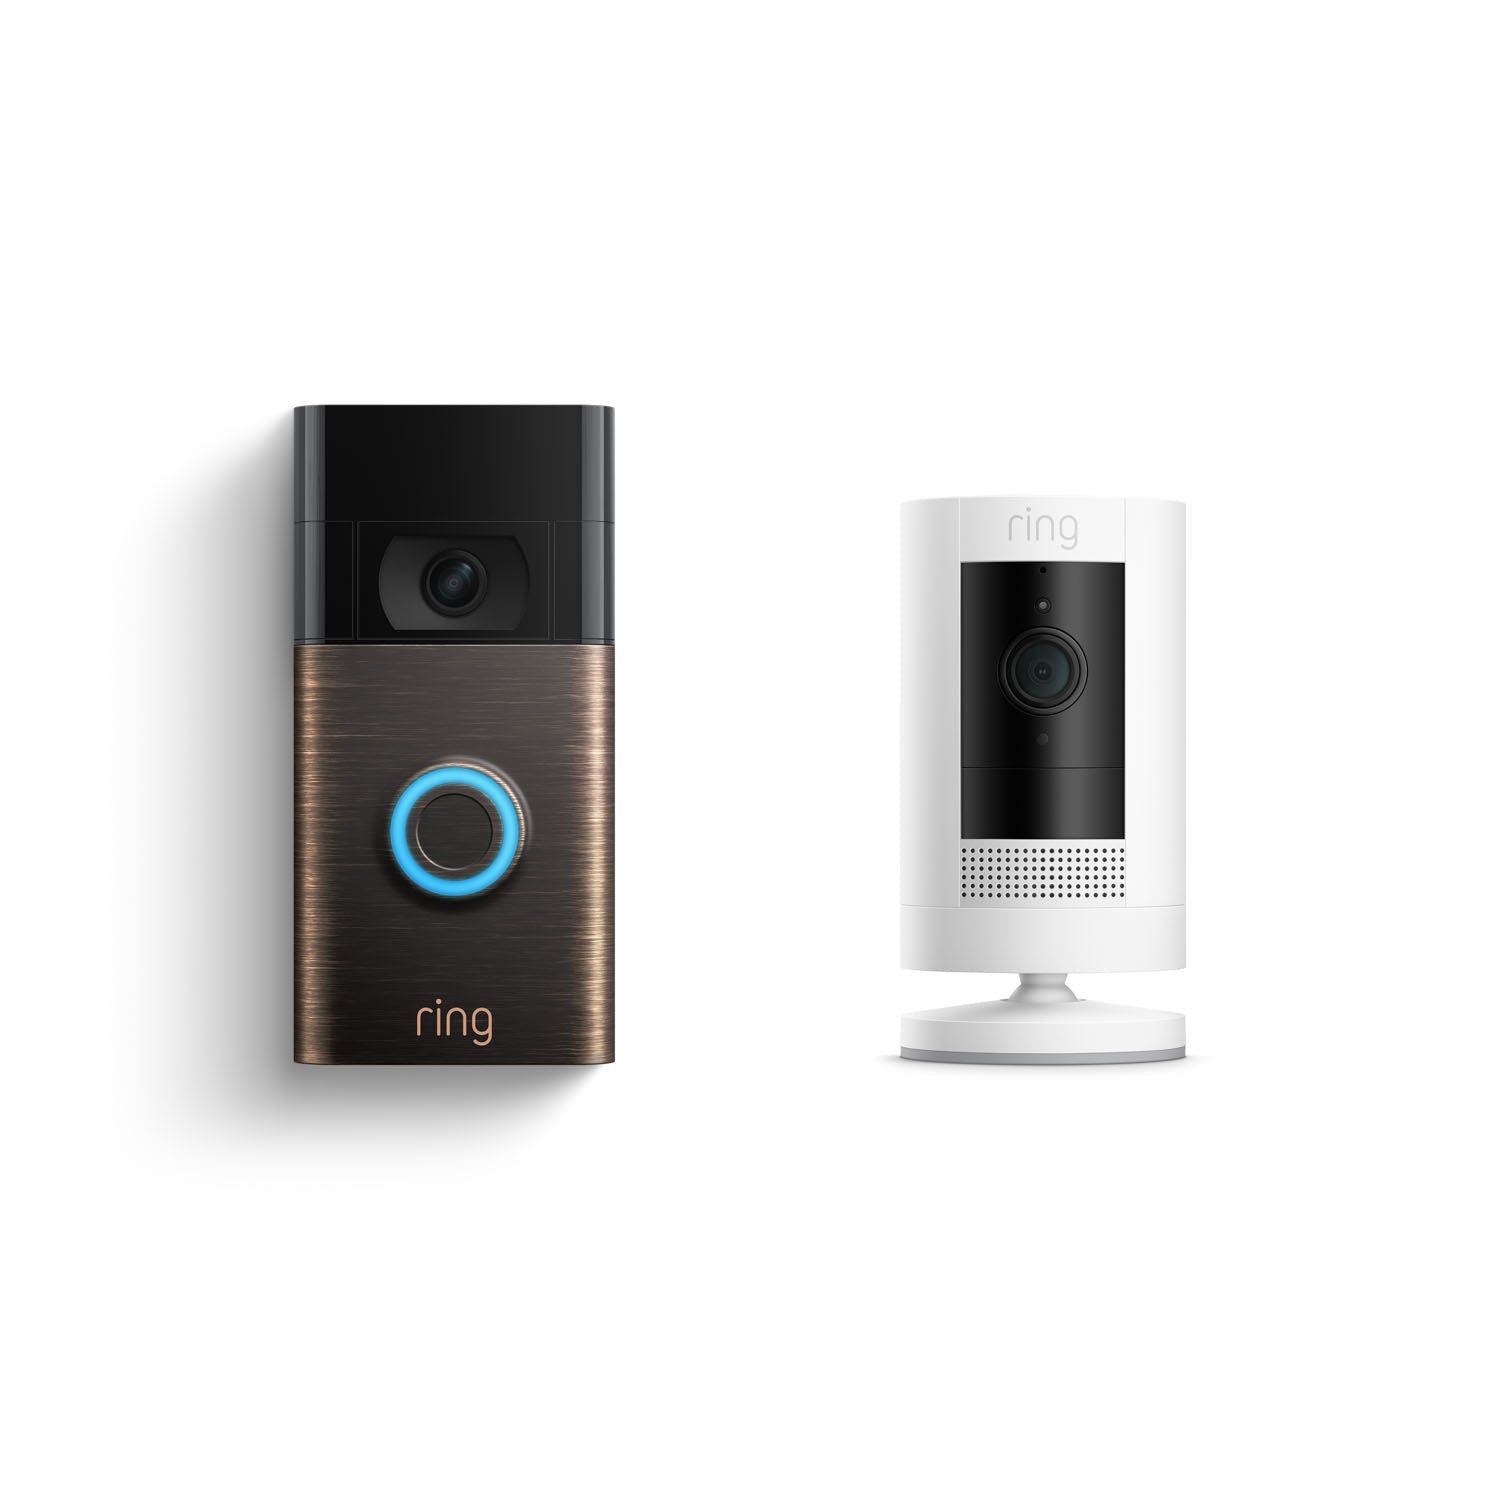 Connected Basic Kit (Video Doorbell (2nd Generation) + Stick Up Cam Battery) - Bronze + White:Connected Basic Kit (Video Doorbell (2nd Generation) + Stick Up Cam Battery)